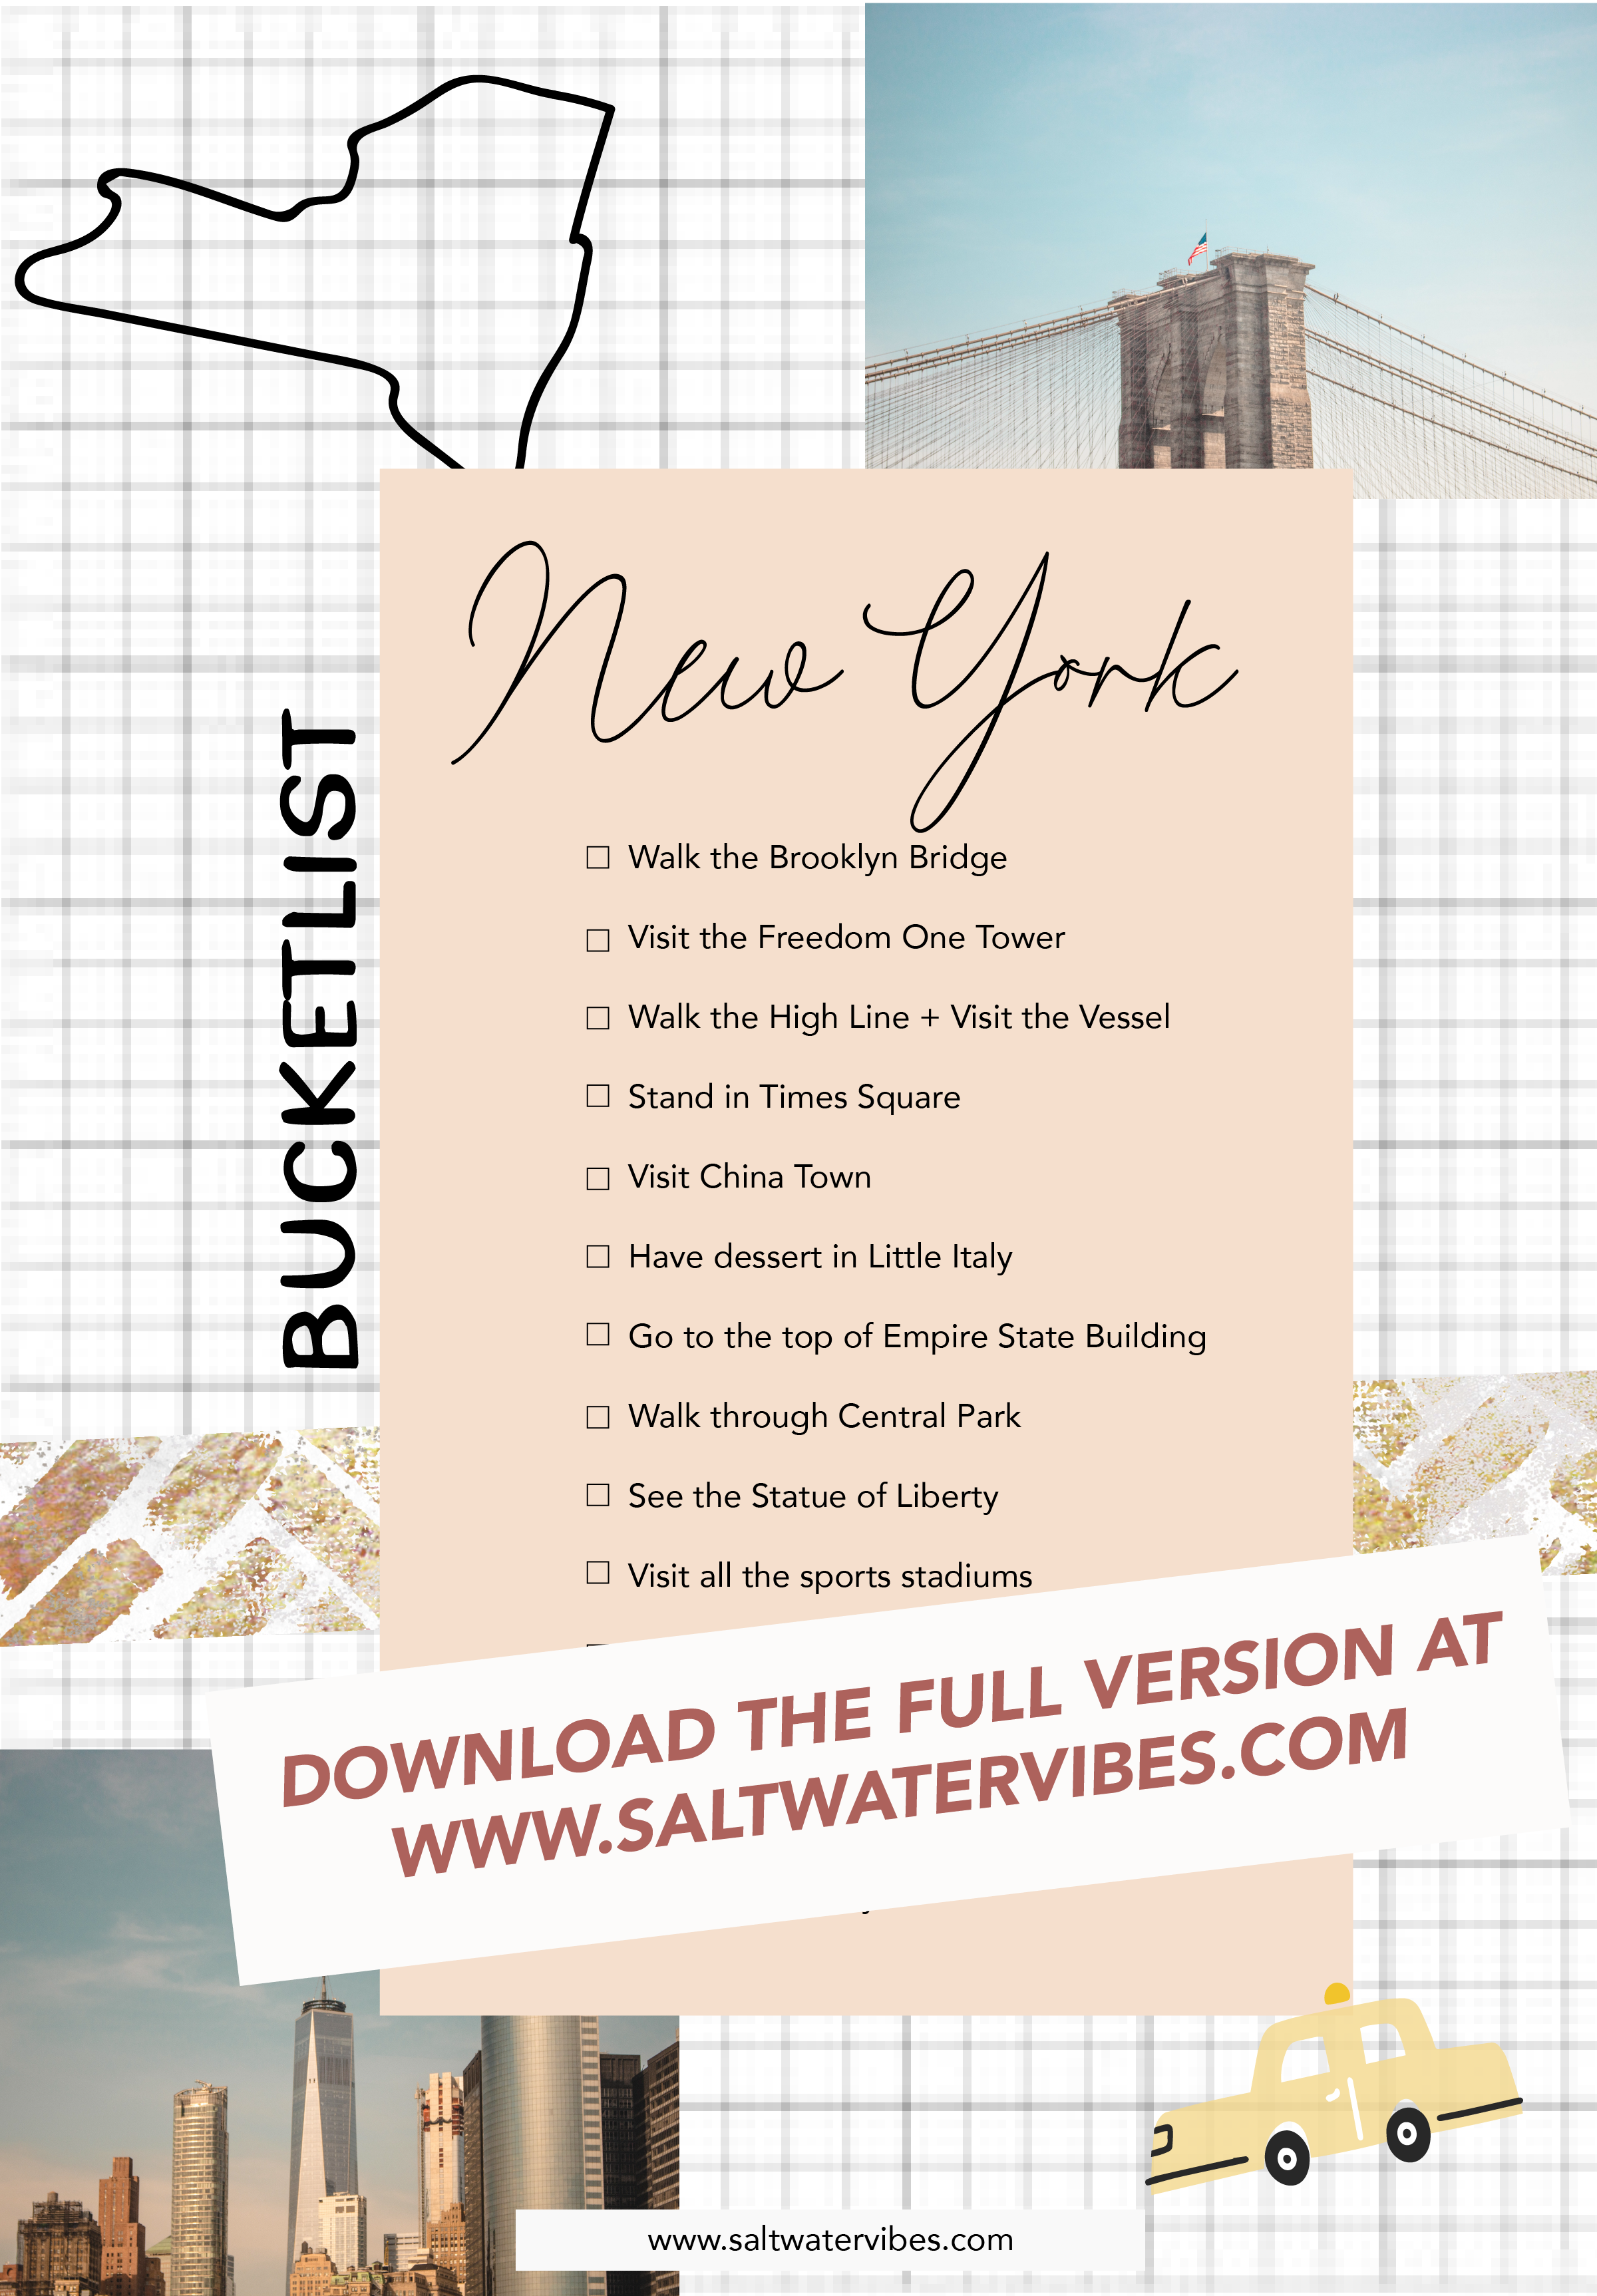 10 Things You Must Do In New York City | SaltWaterVibes